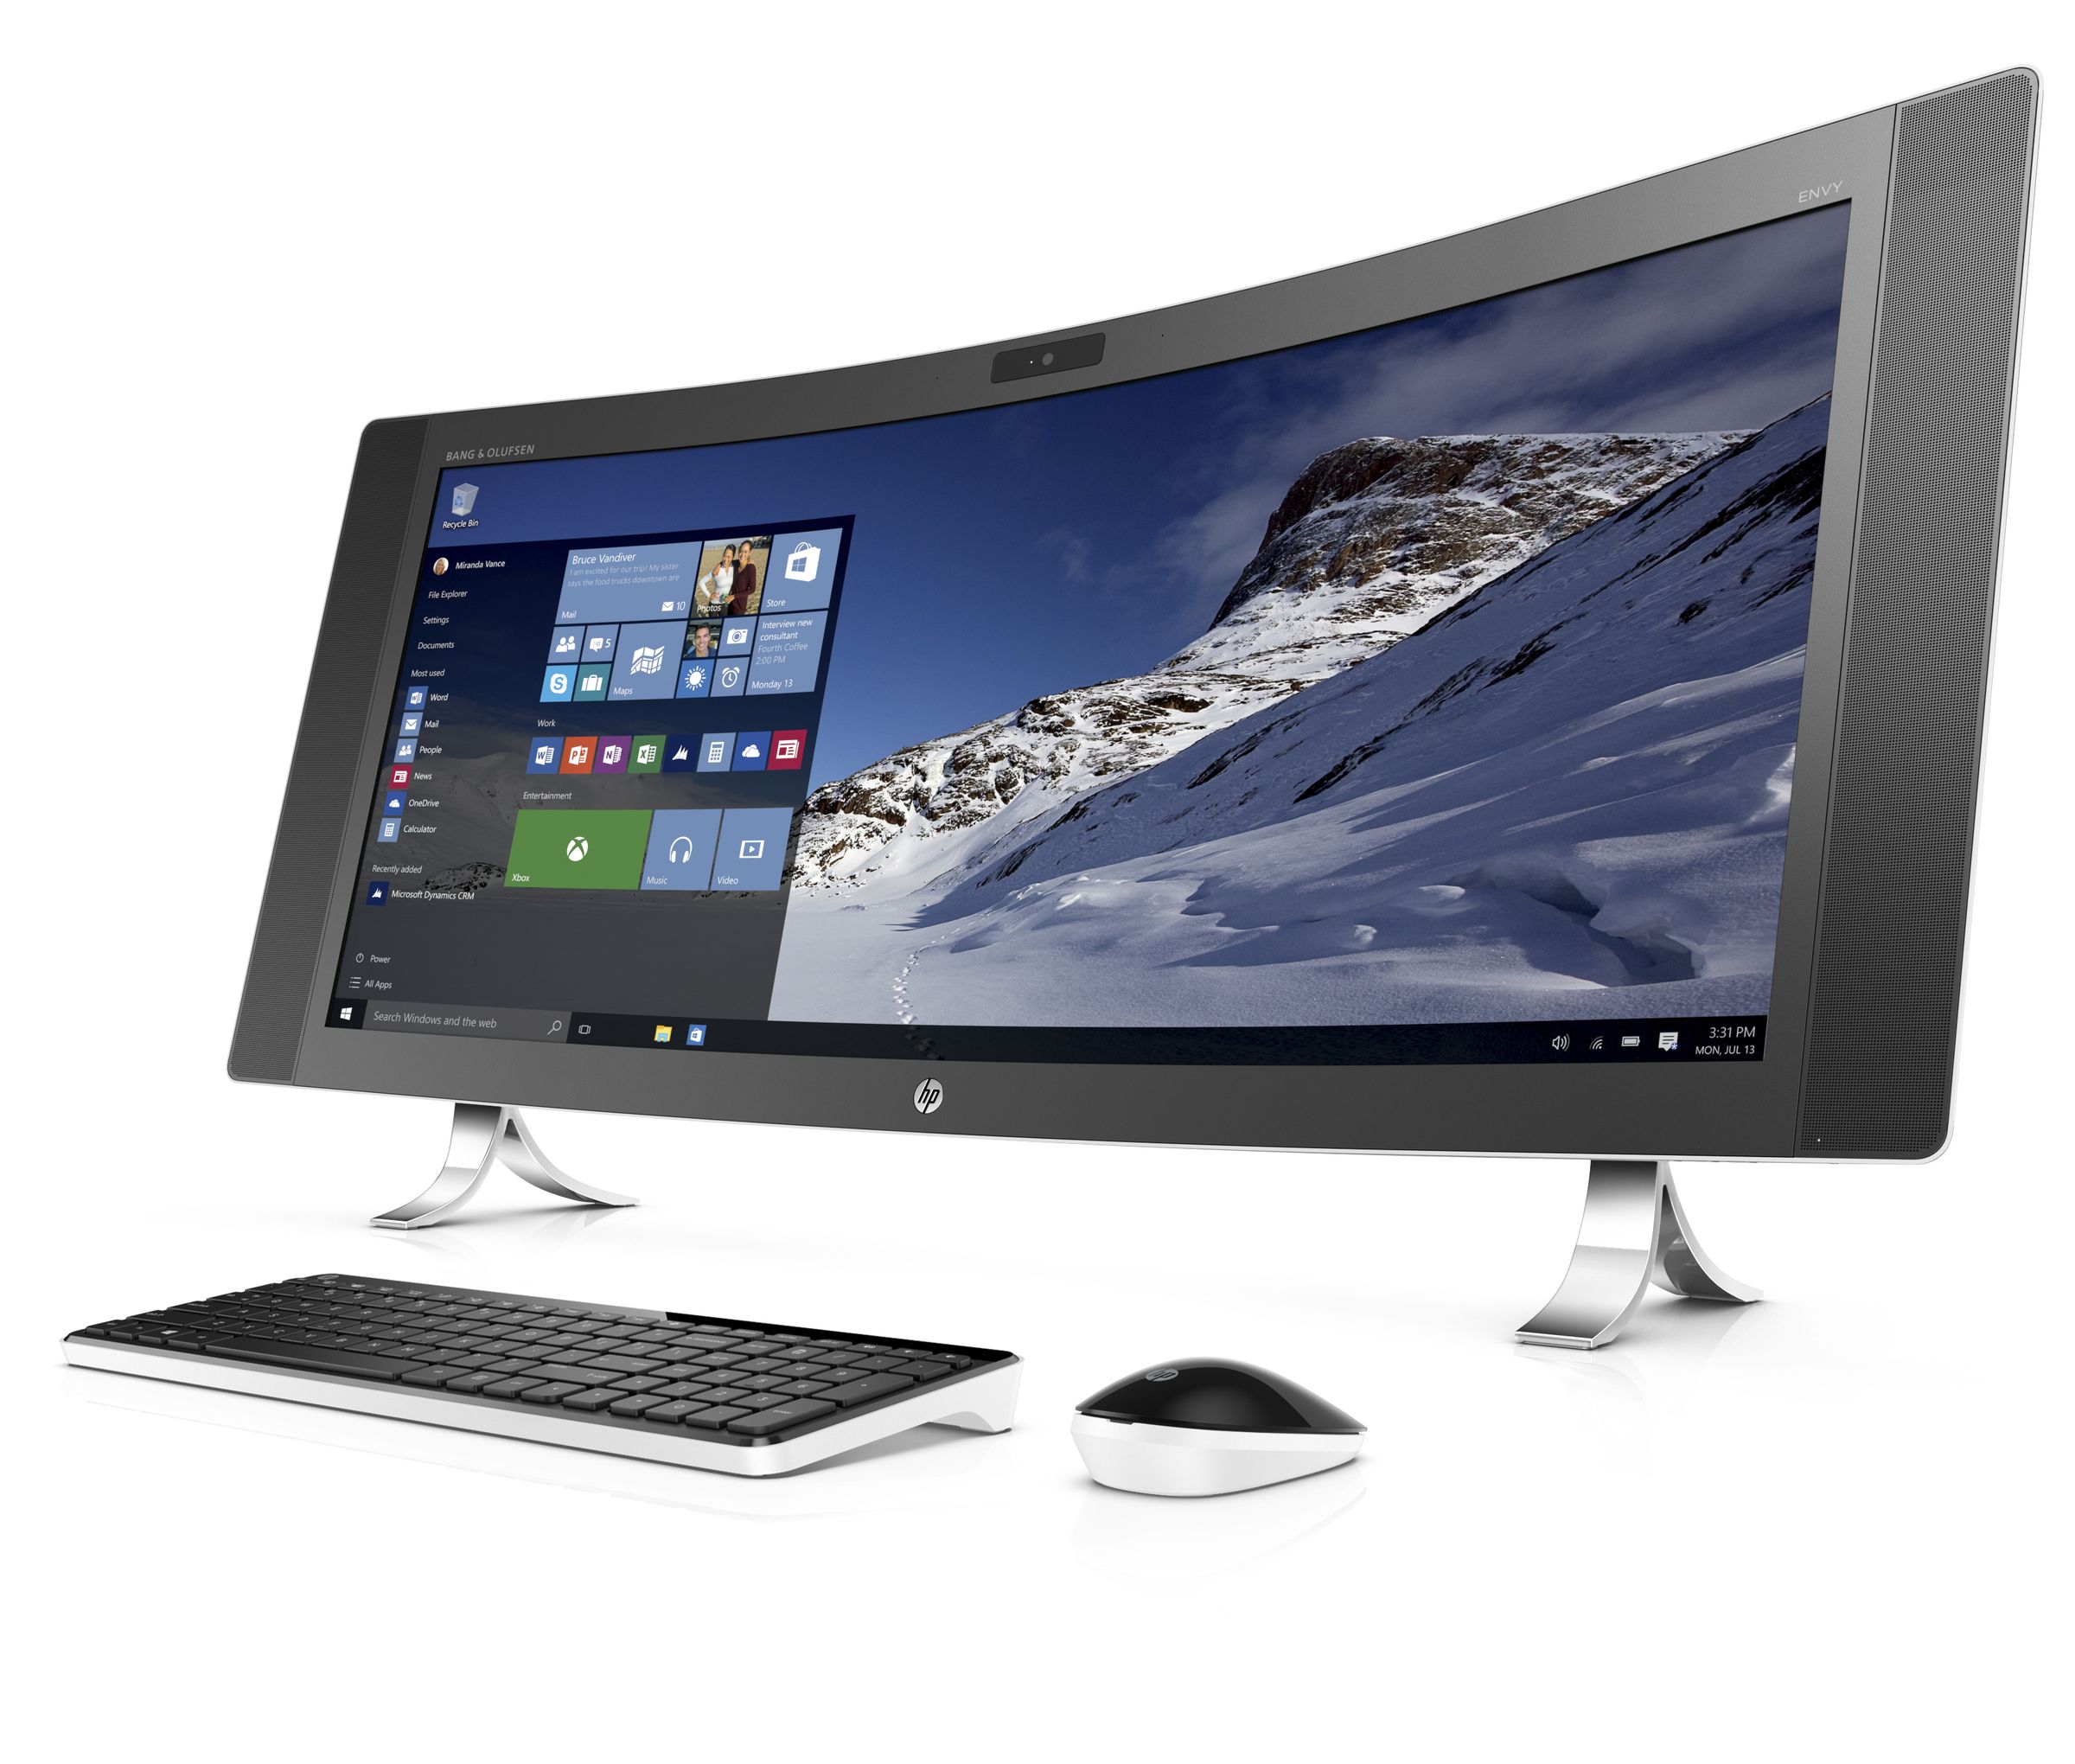 Envy Curved All-in-One PC